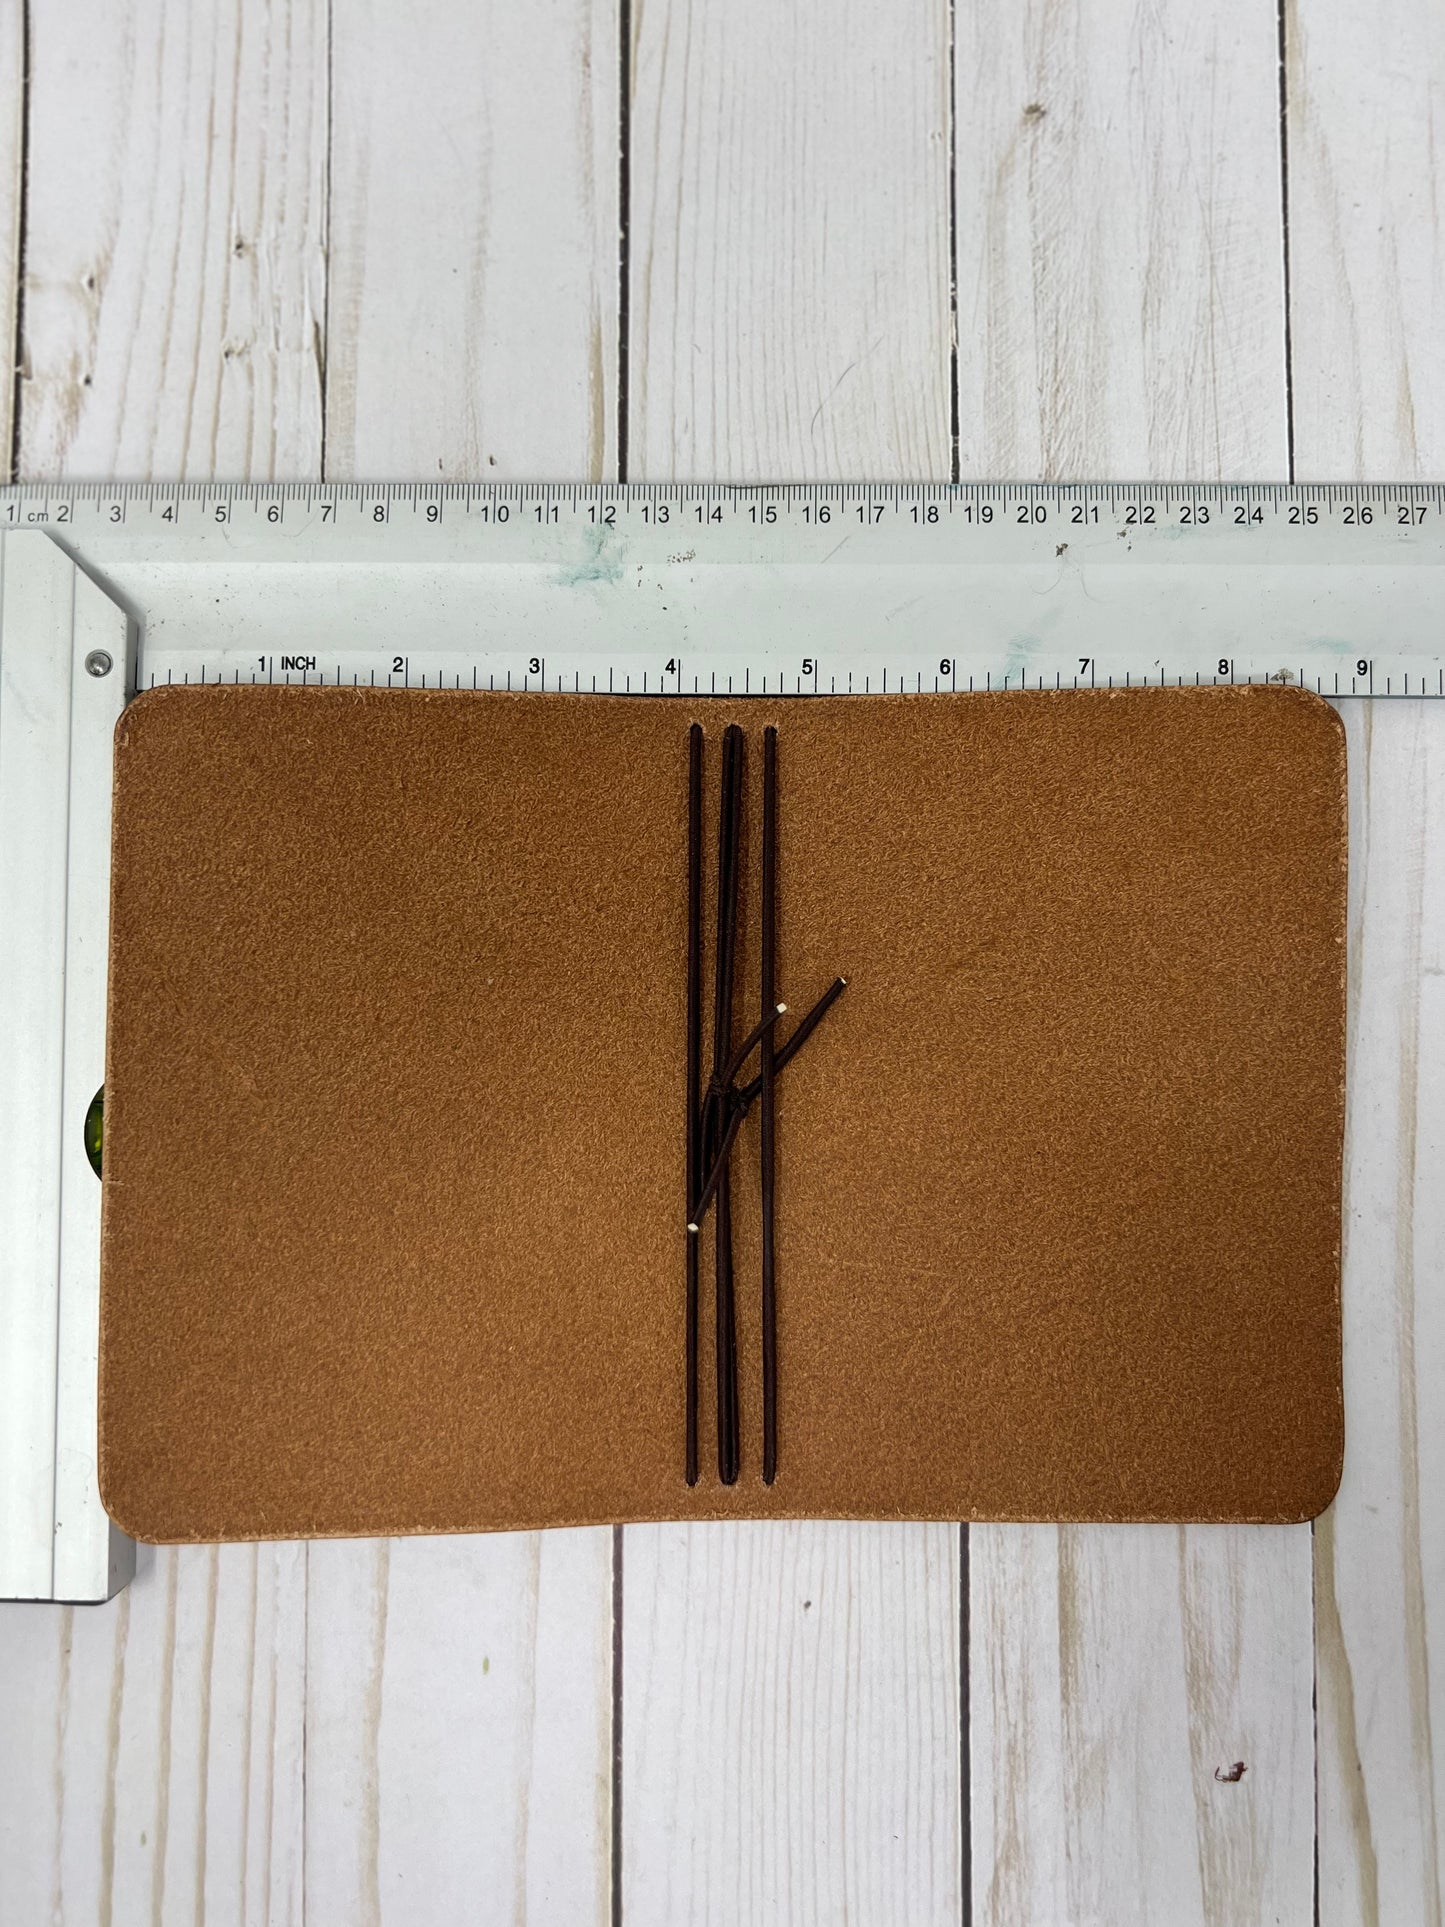 Pocket LeatherTraveler’s Notebook, Oak Harness,  for 3.5” x 5.5” inserts (not included)